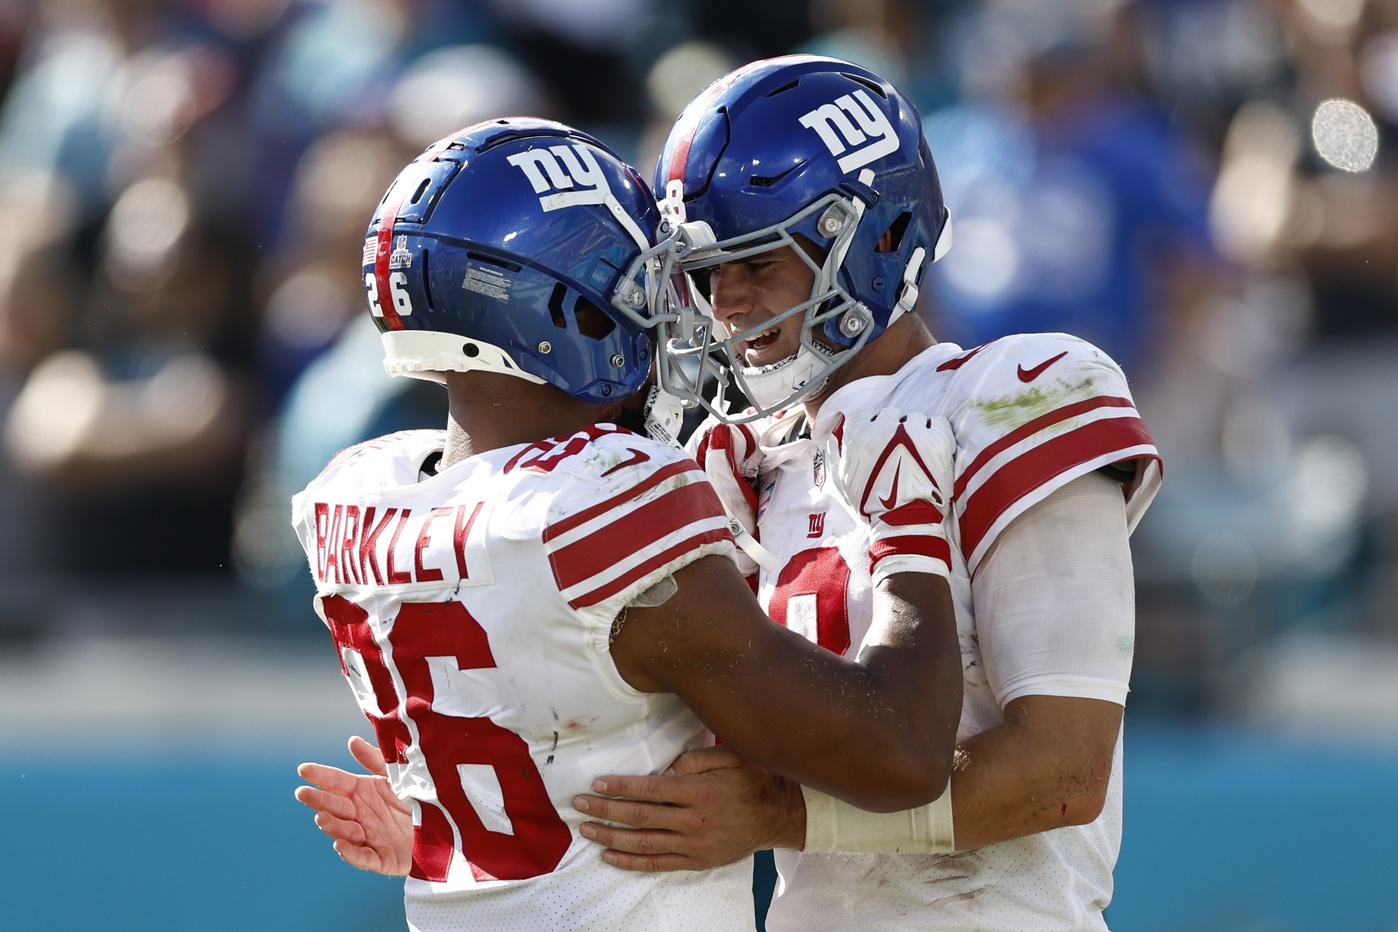 Giants playoff seeding: Does New York have anything to play for in Week 18?  - DraftKings Network